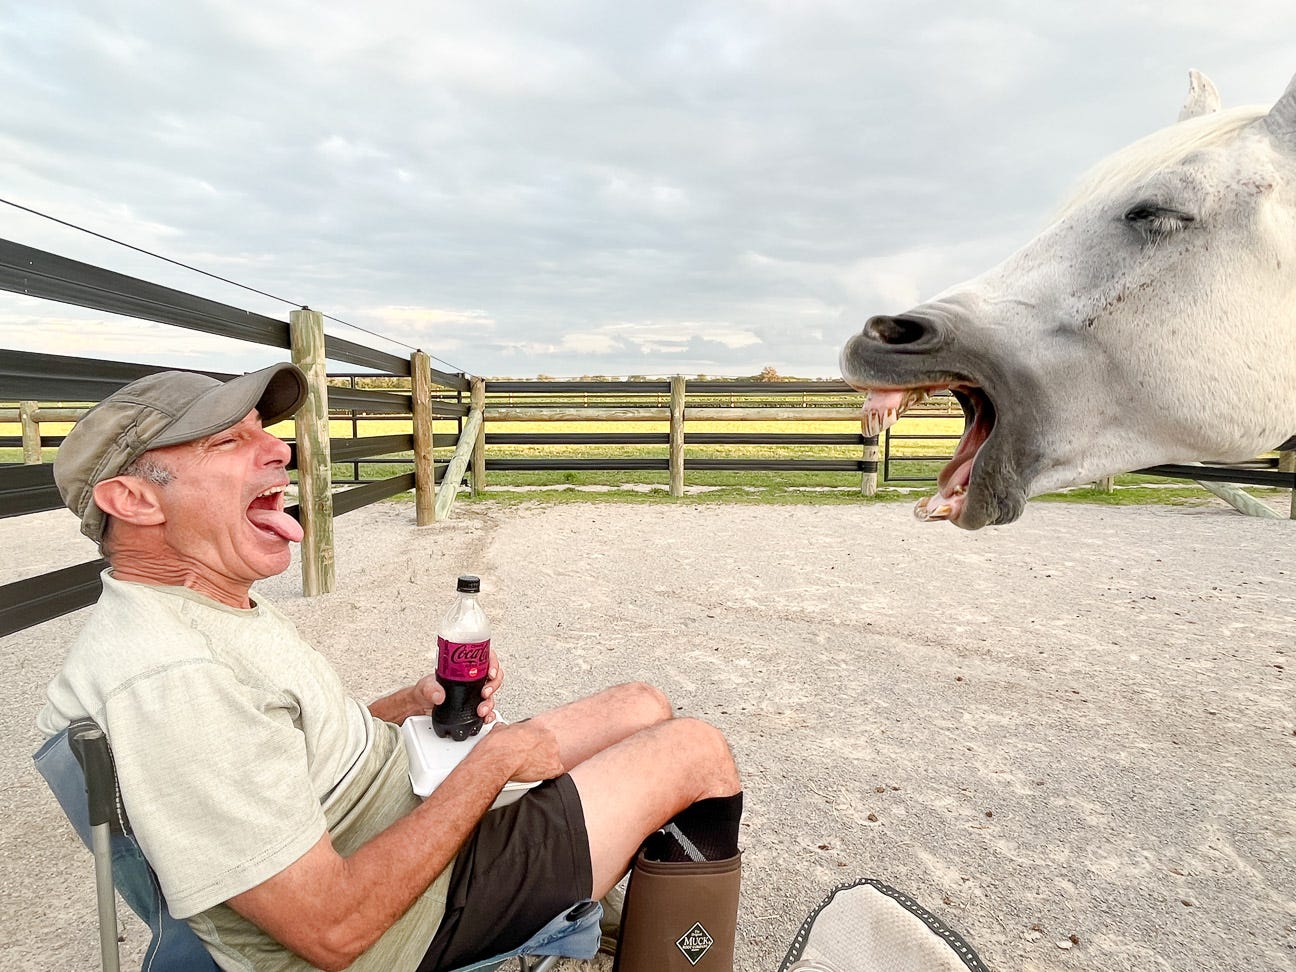 horse and person yawning at each other